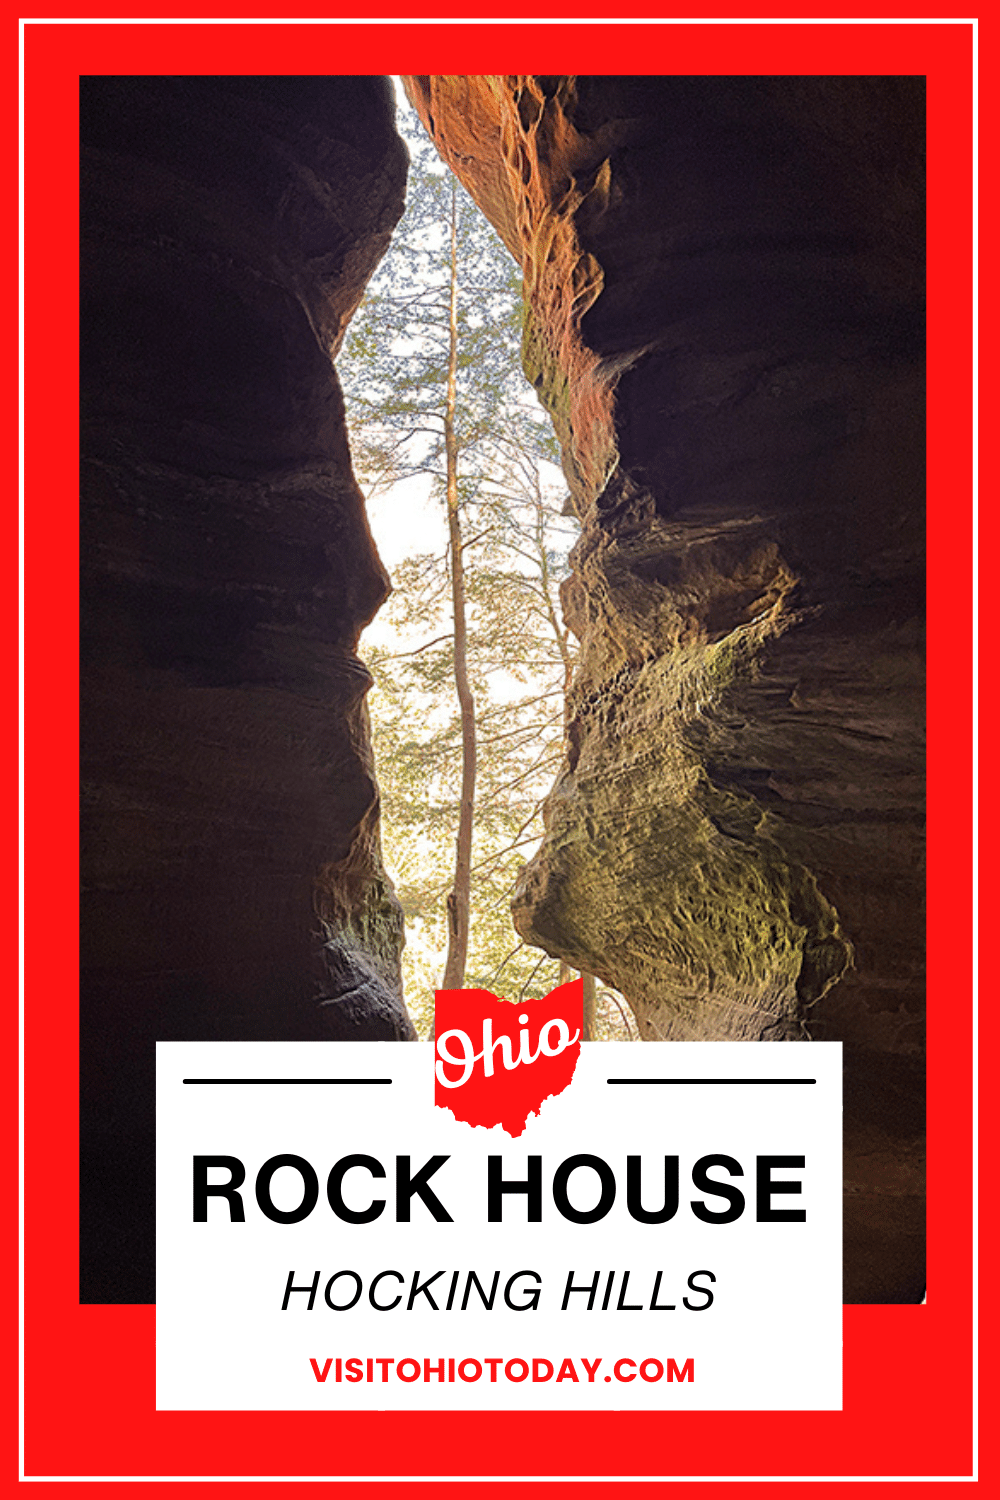 Rock House is an interesting part of the Hocking Hills Region. If you are into caves and hiking, this is the place for you.